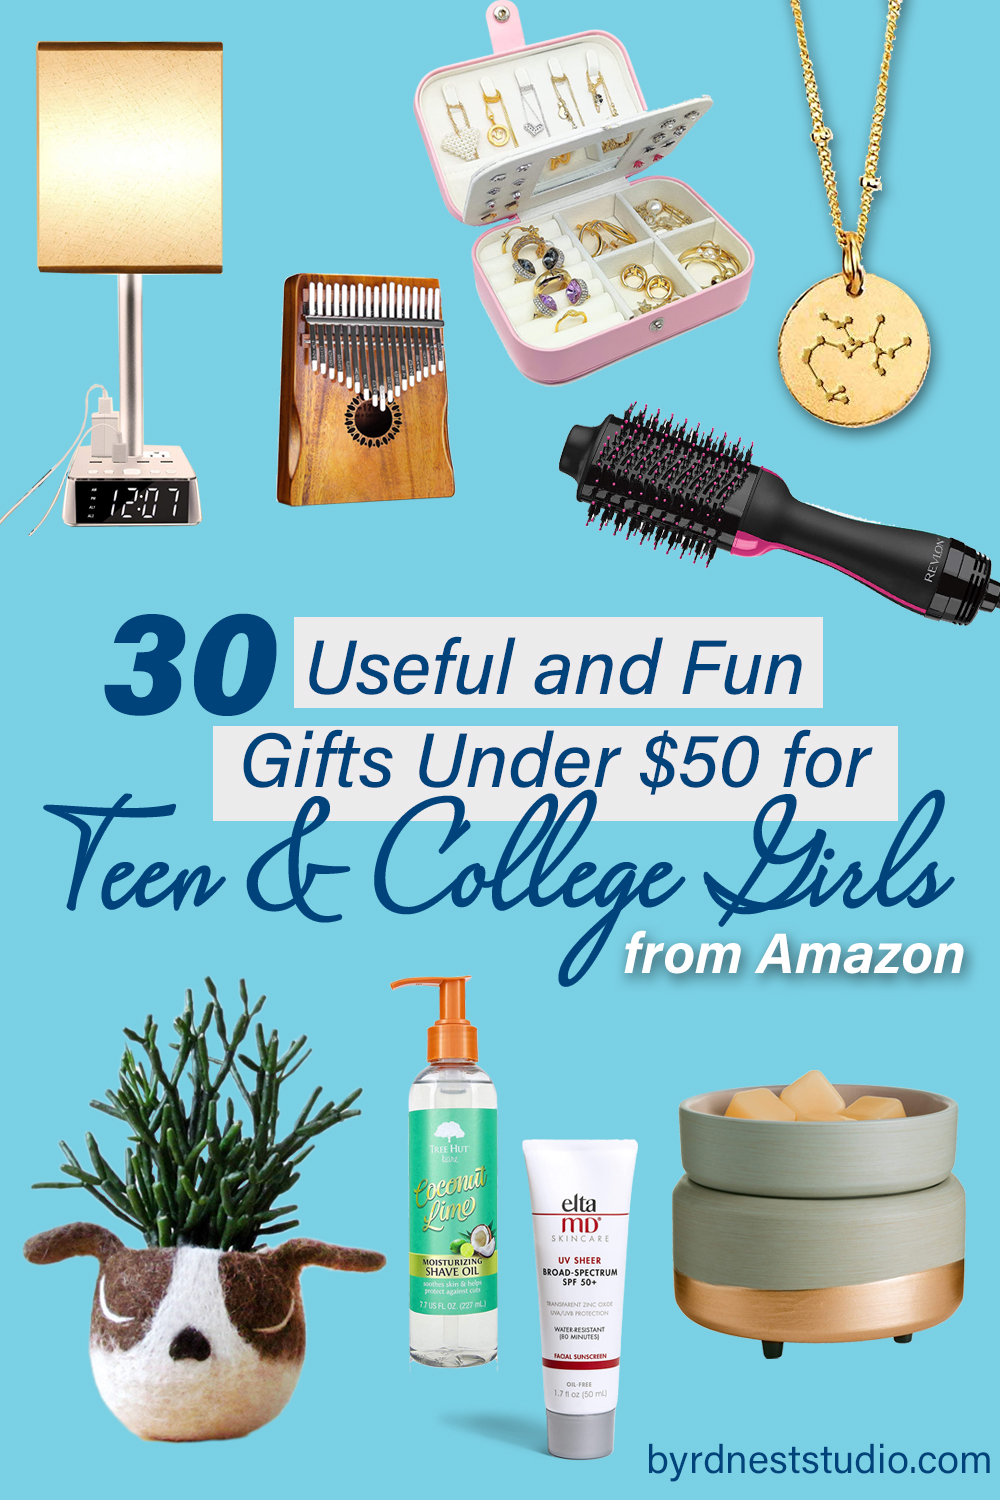 2021 Holiday  Gift Guide: 30 Useful and Fun Gifts Under $50